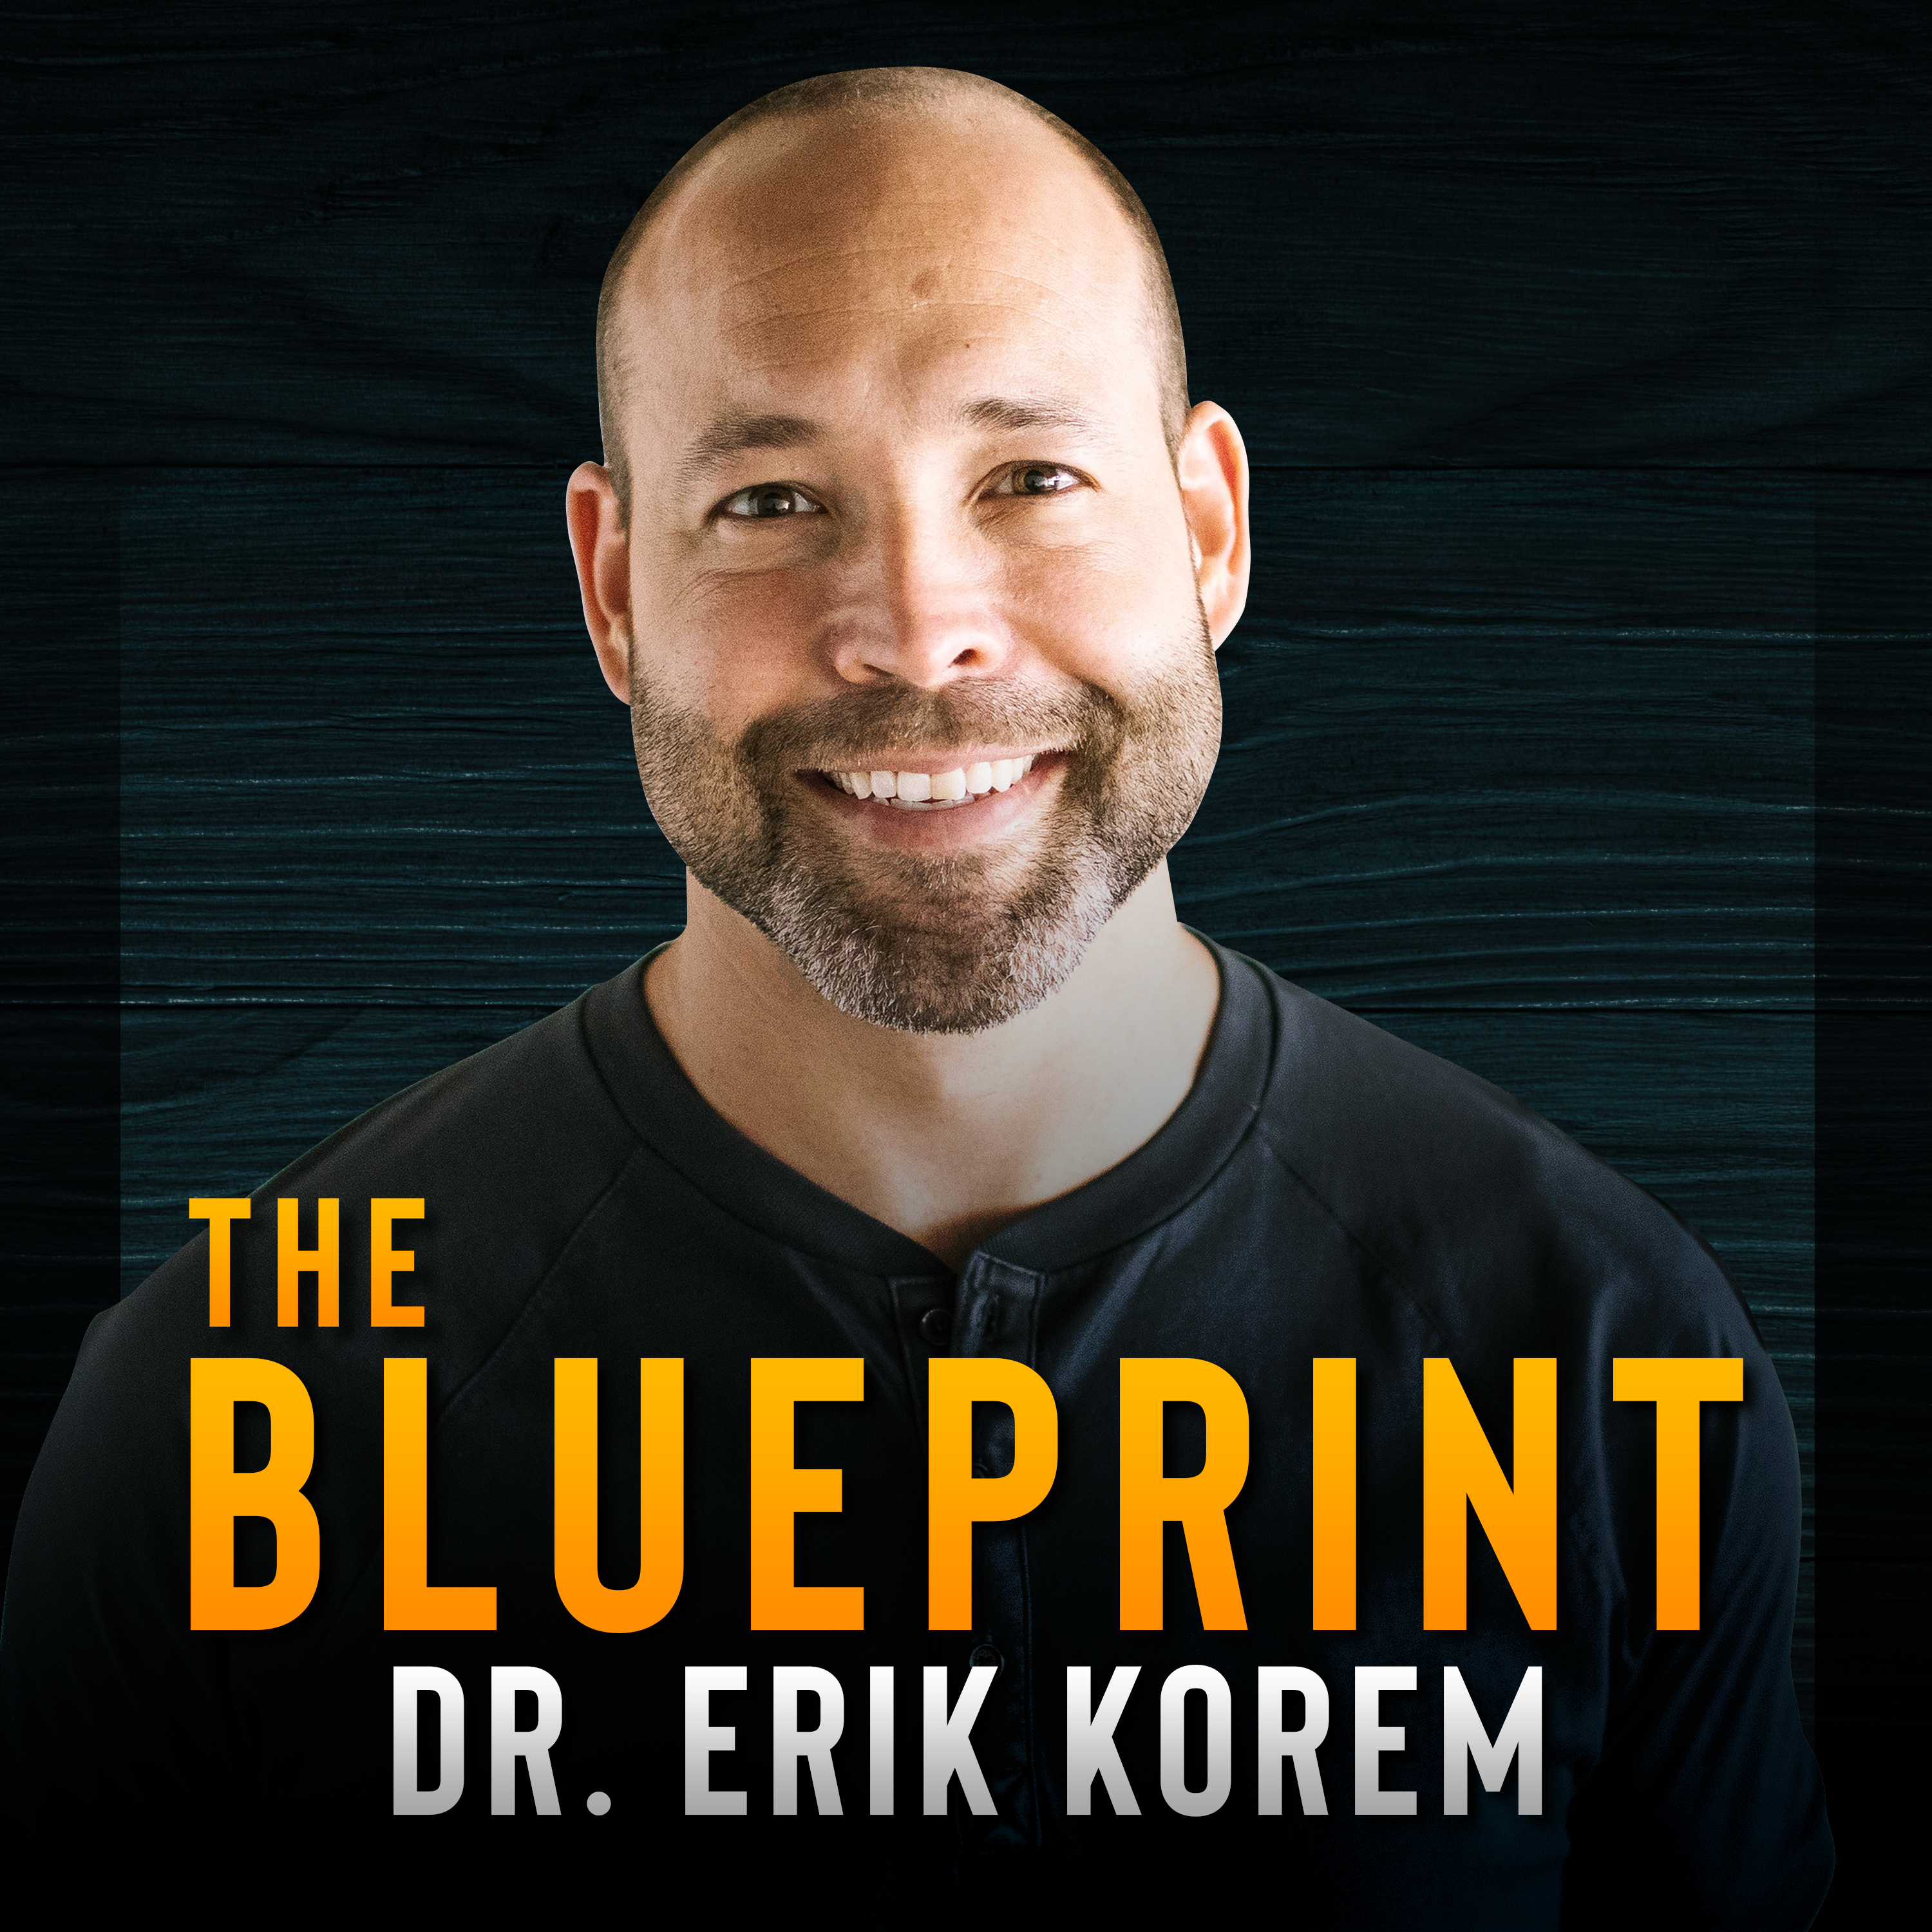 #459. The Best Exercise for Fighting Depression | Exercise vs SSRI & More